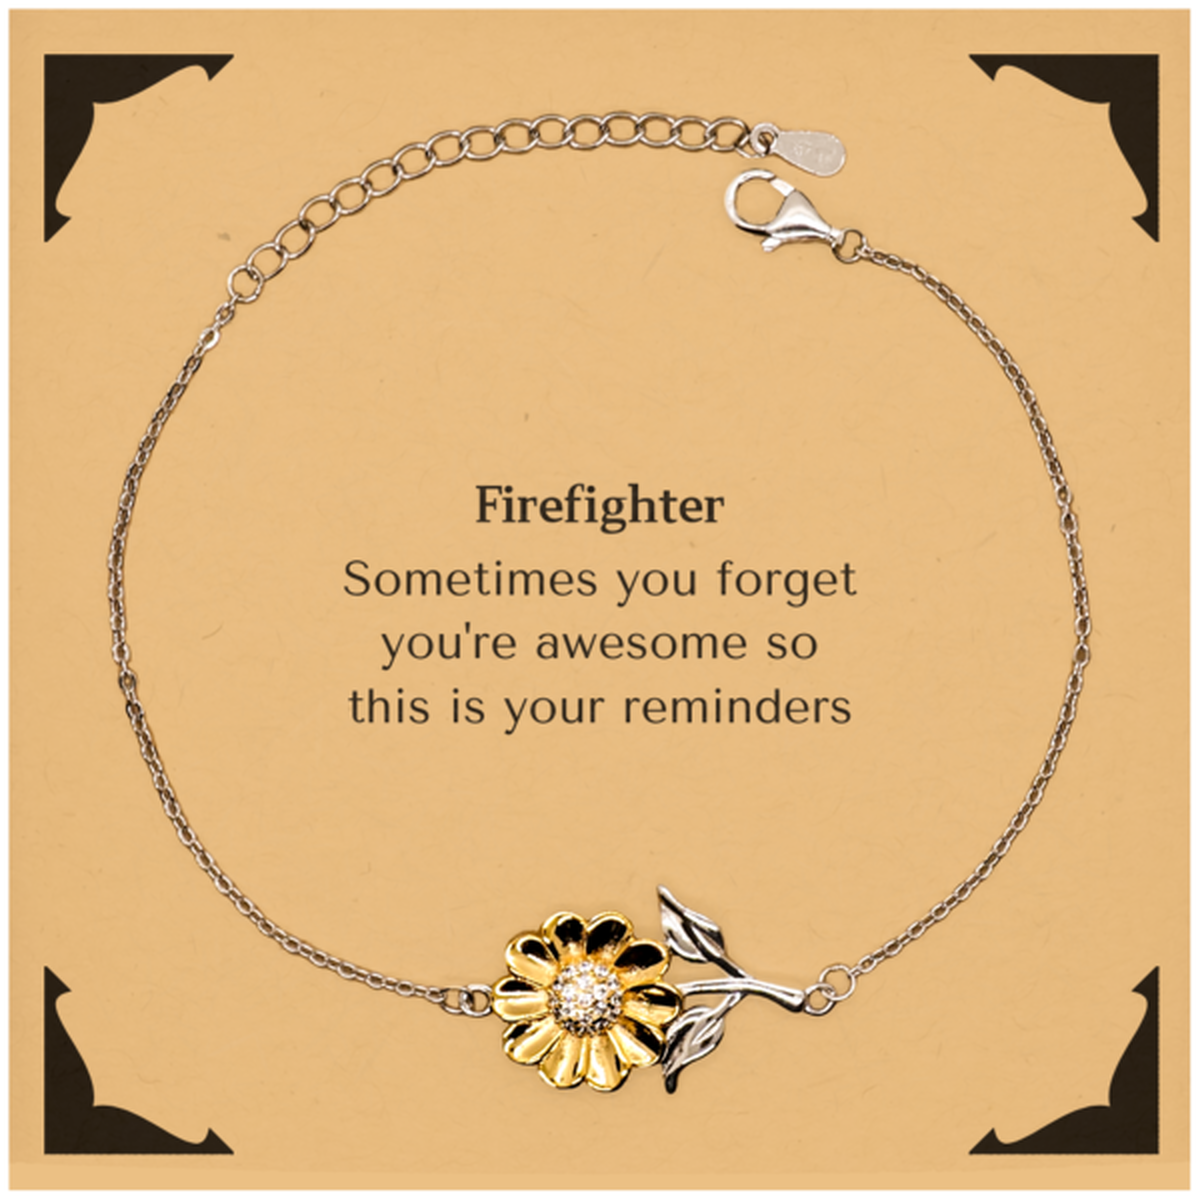 Sentimental Firefighter Sunflower Bracelet, Firefighter Sometimes you forget you're awesome so this is your reminders, Graduation Christmas Birthday Gifts for Firefighter, Men, Women, Coworkers